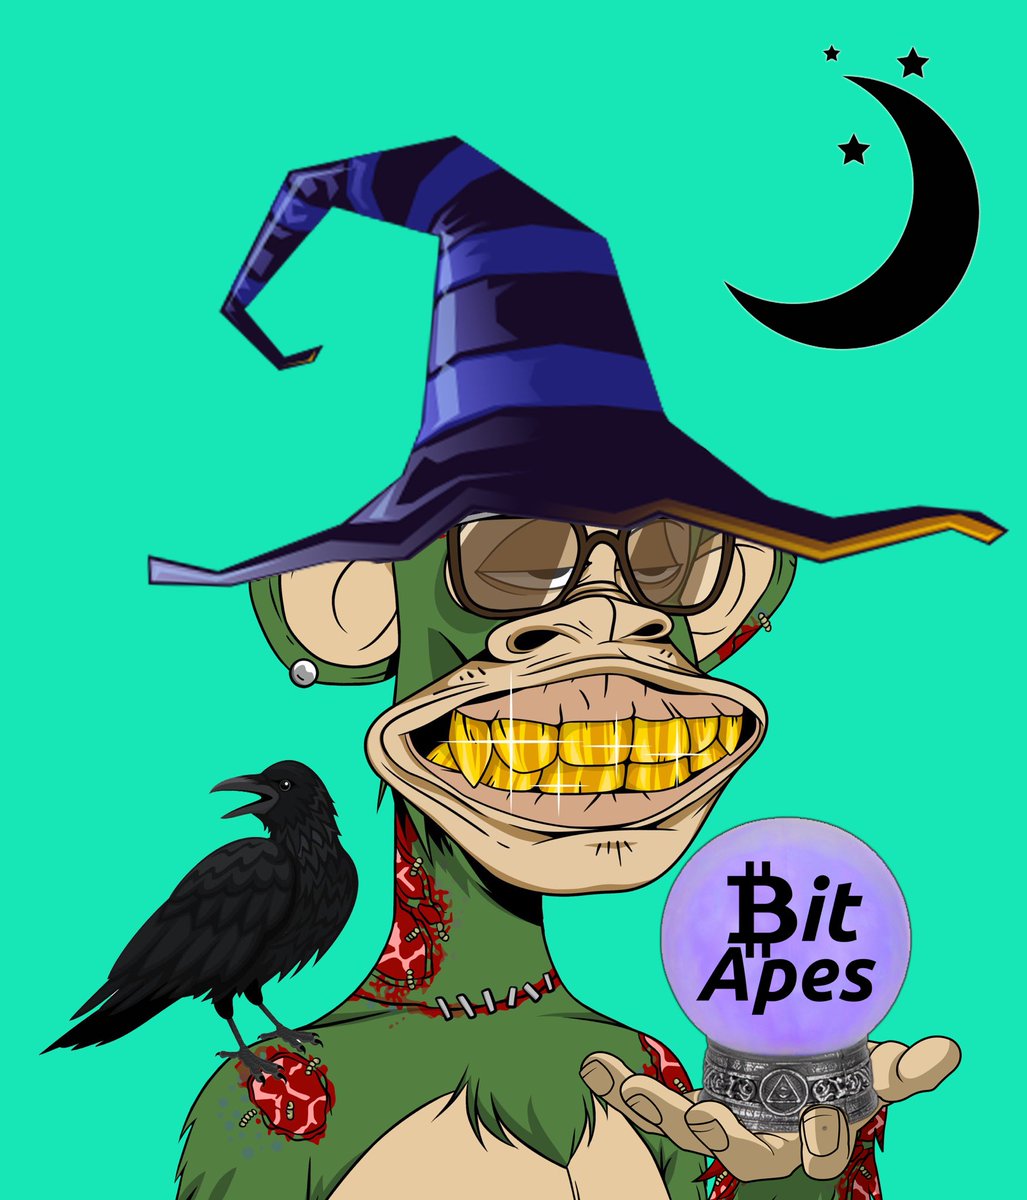 🔮 I foresee Amazing things in the future for BitApes!!! 💋 @BitApes_btc #BitApes #LFG #lovemyape #BITAPESALLDAY #flexingmybitape #ordinals #future @KrazyKimberlin